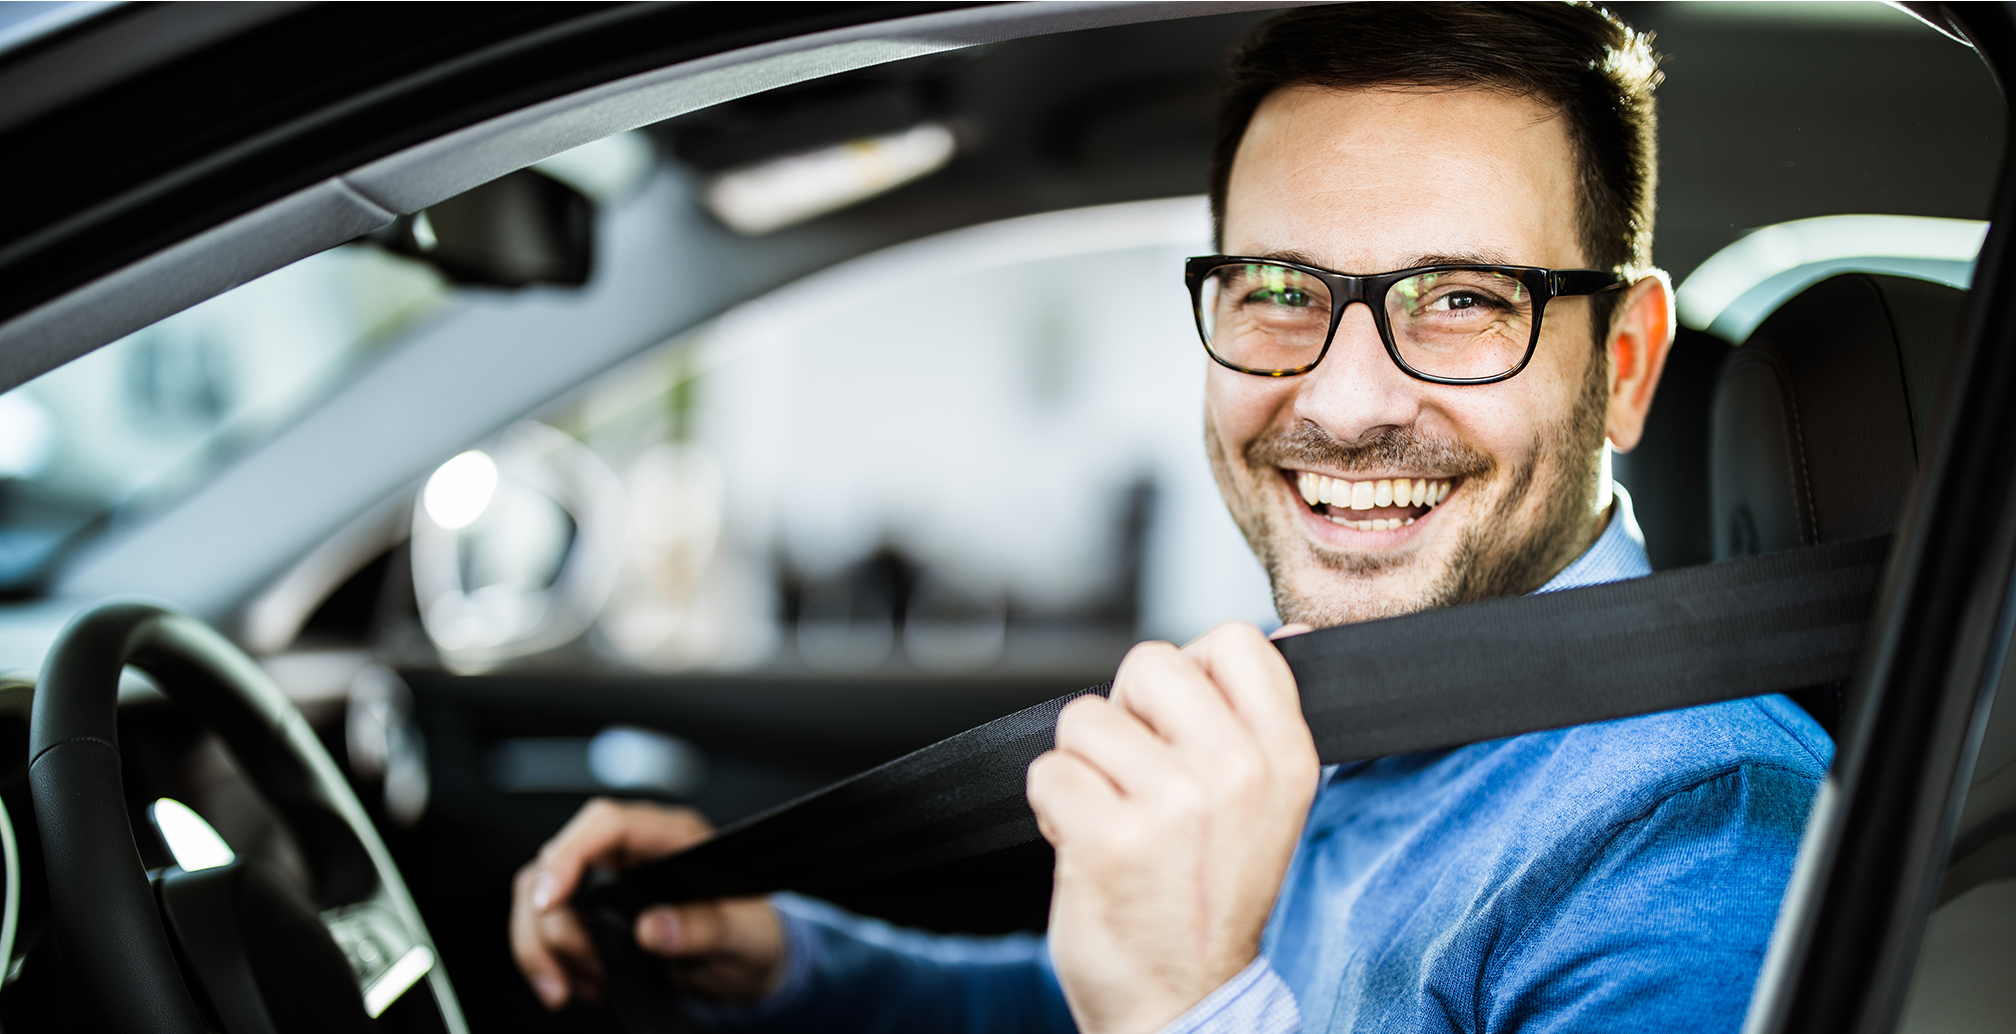 Man smiles while he practices seat belt safety